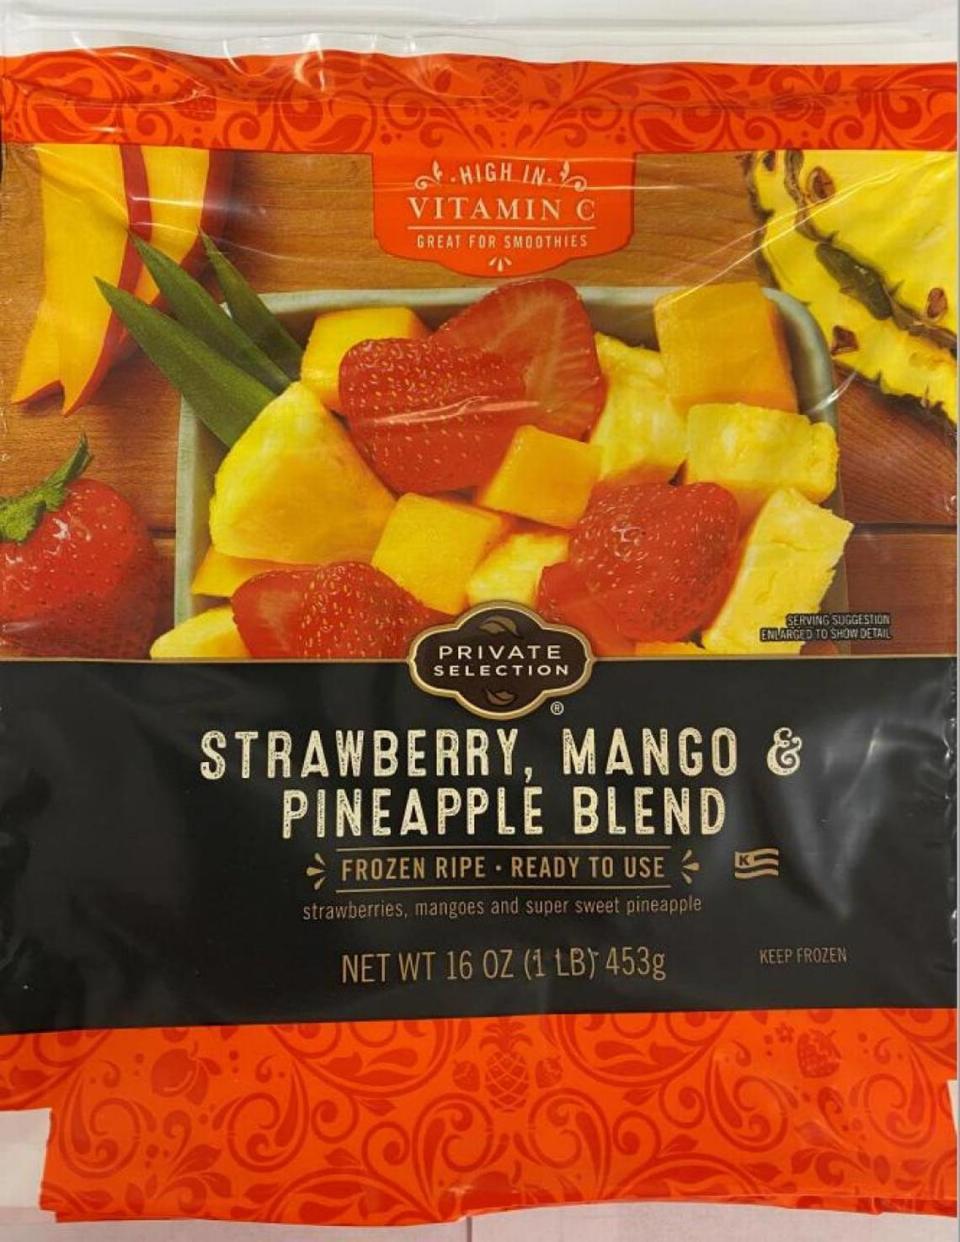 Private Selection Strawberry Mango & Pineapple blend